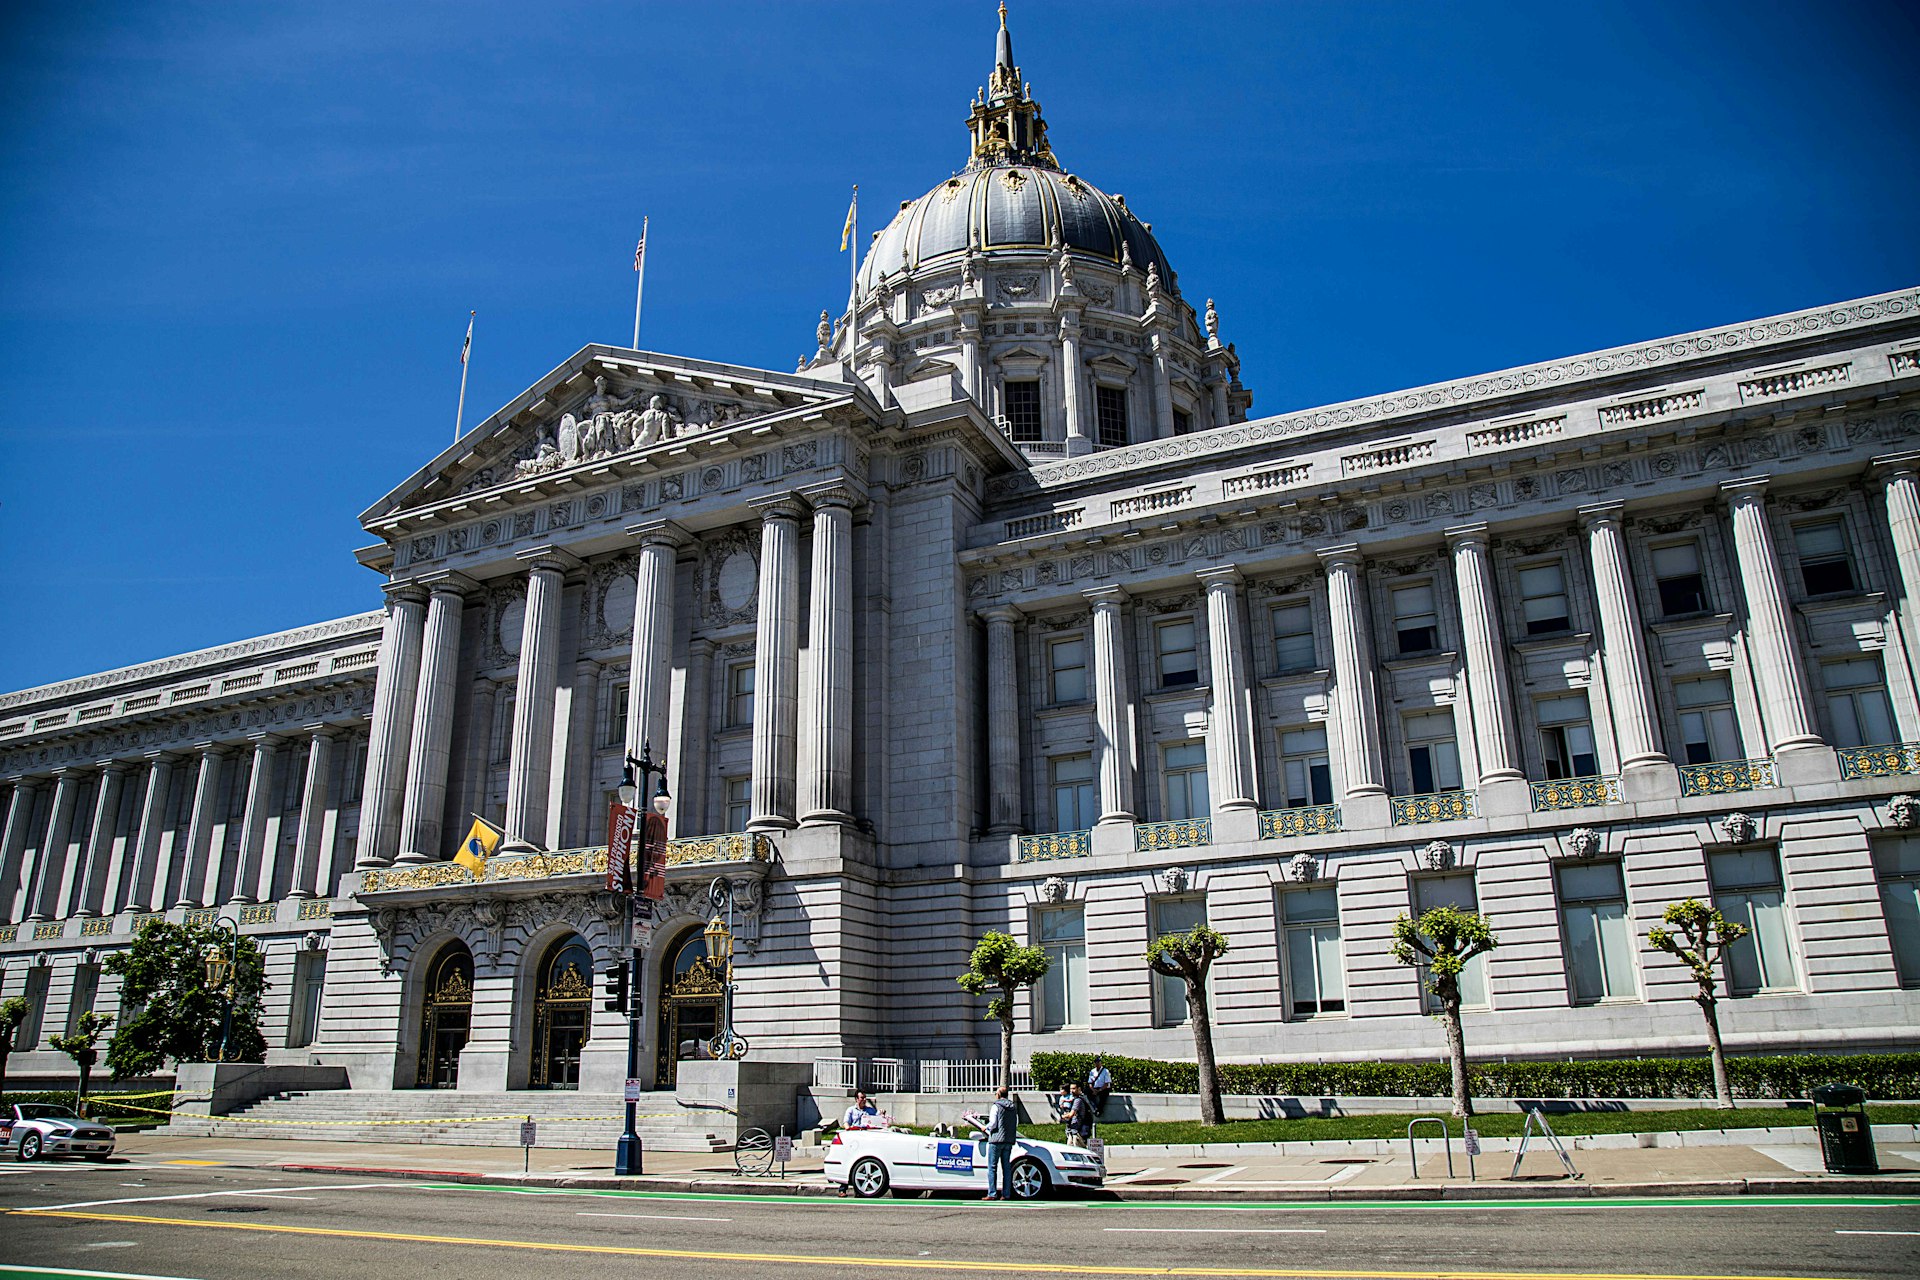 San Francisco's seat of government, City Hall, has appeared in an eclectic mix of movies © Alexander Howard / Lonely Planet